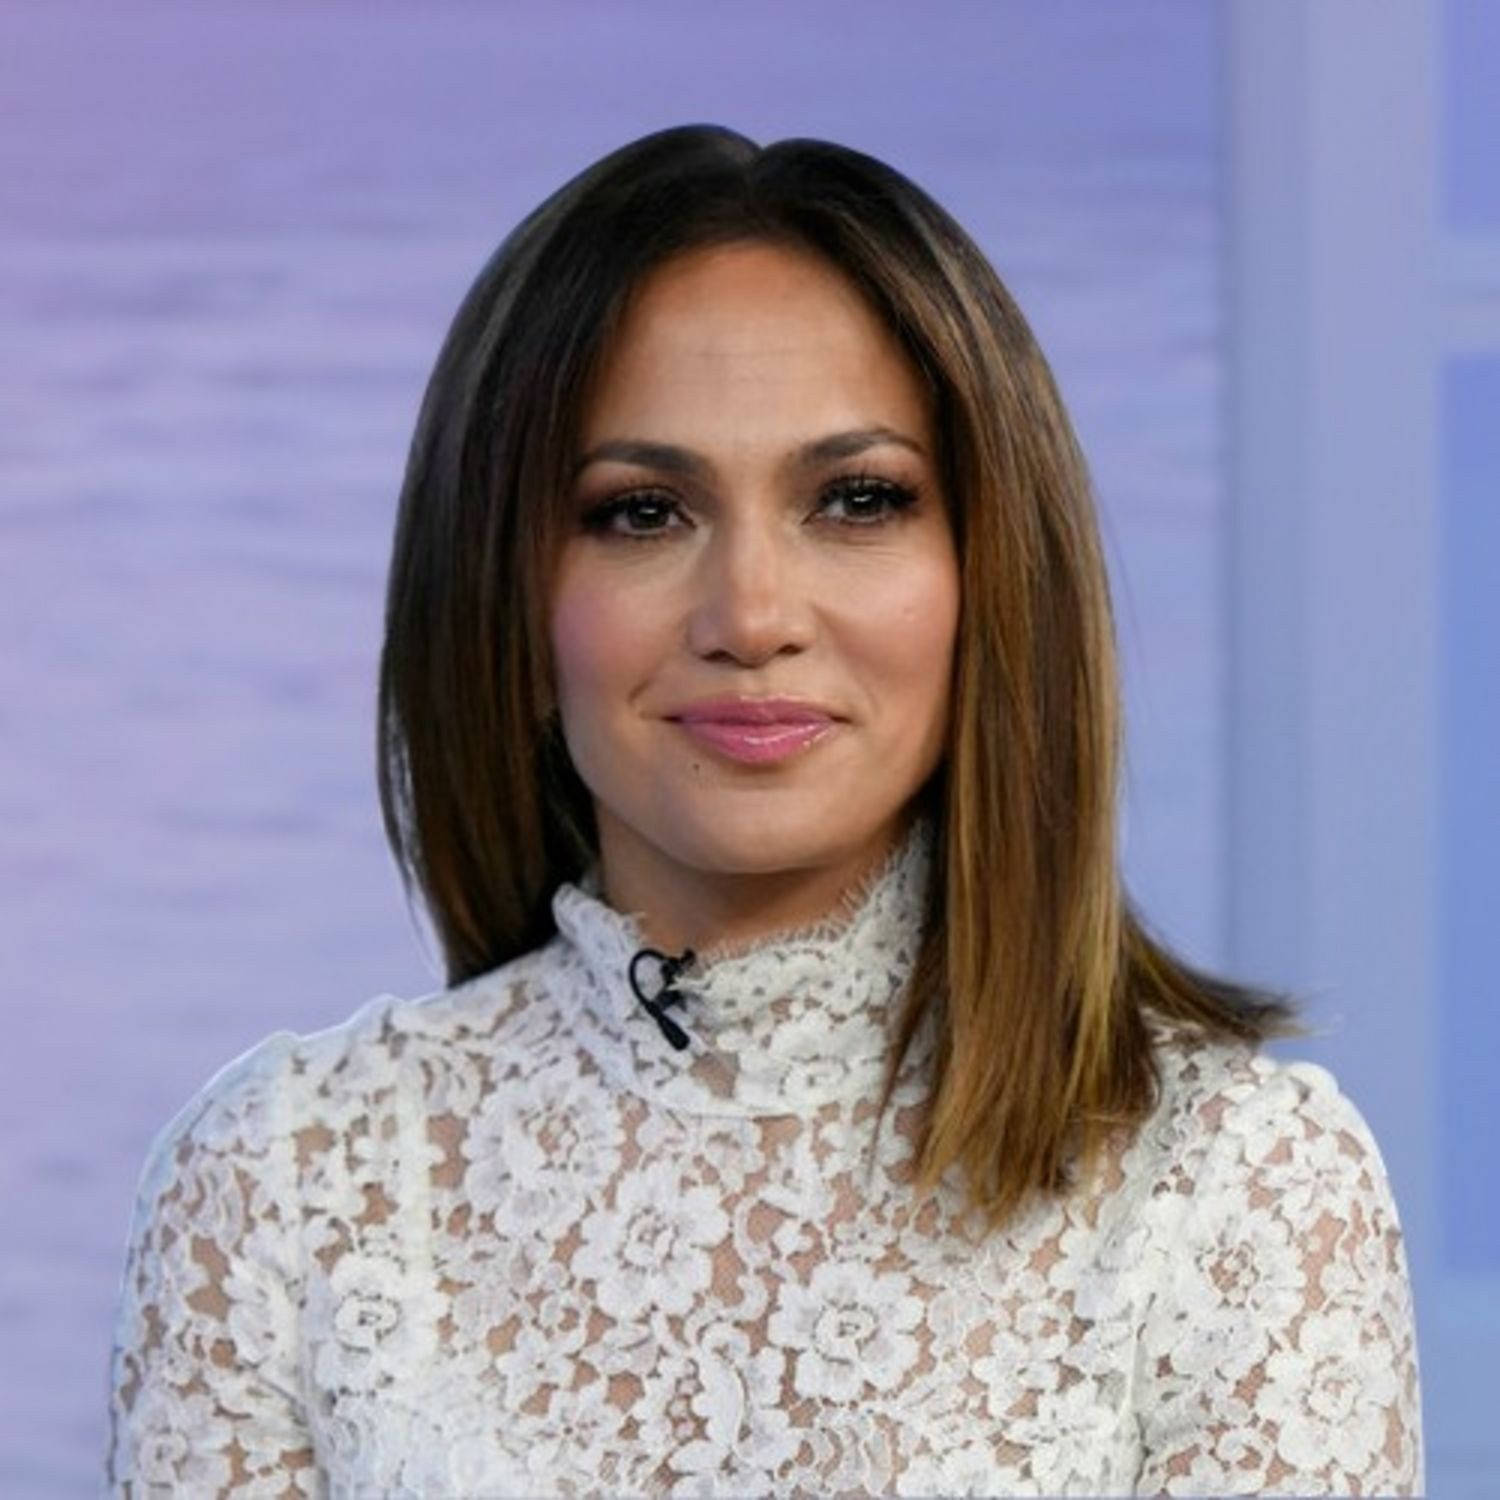 Jennifer Lopez Looks Sophisticated With Her Straight Bob. Background